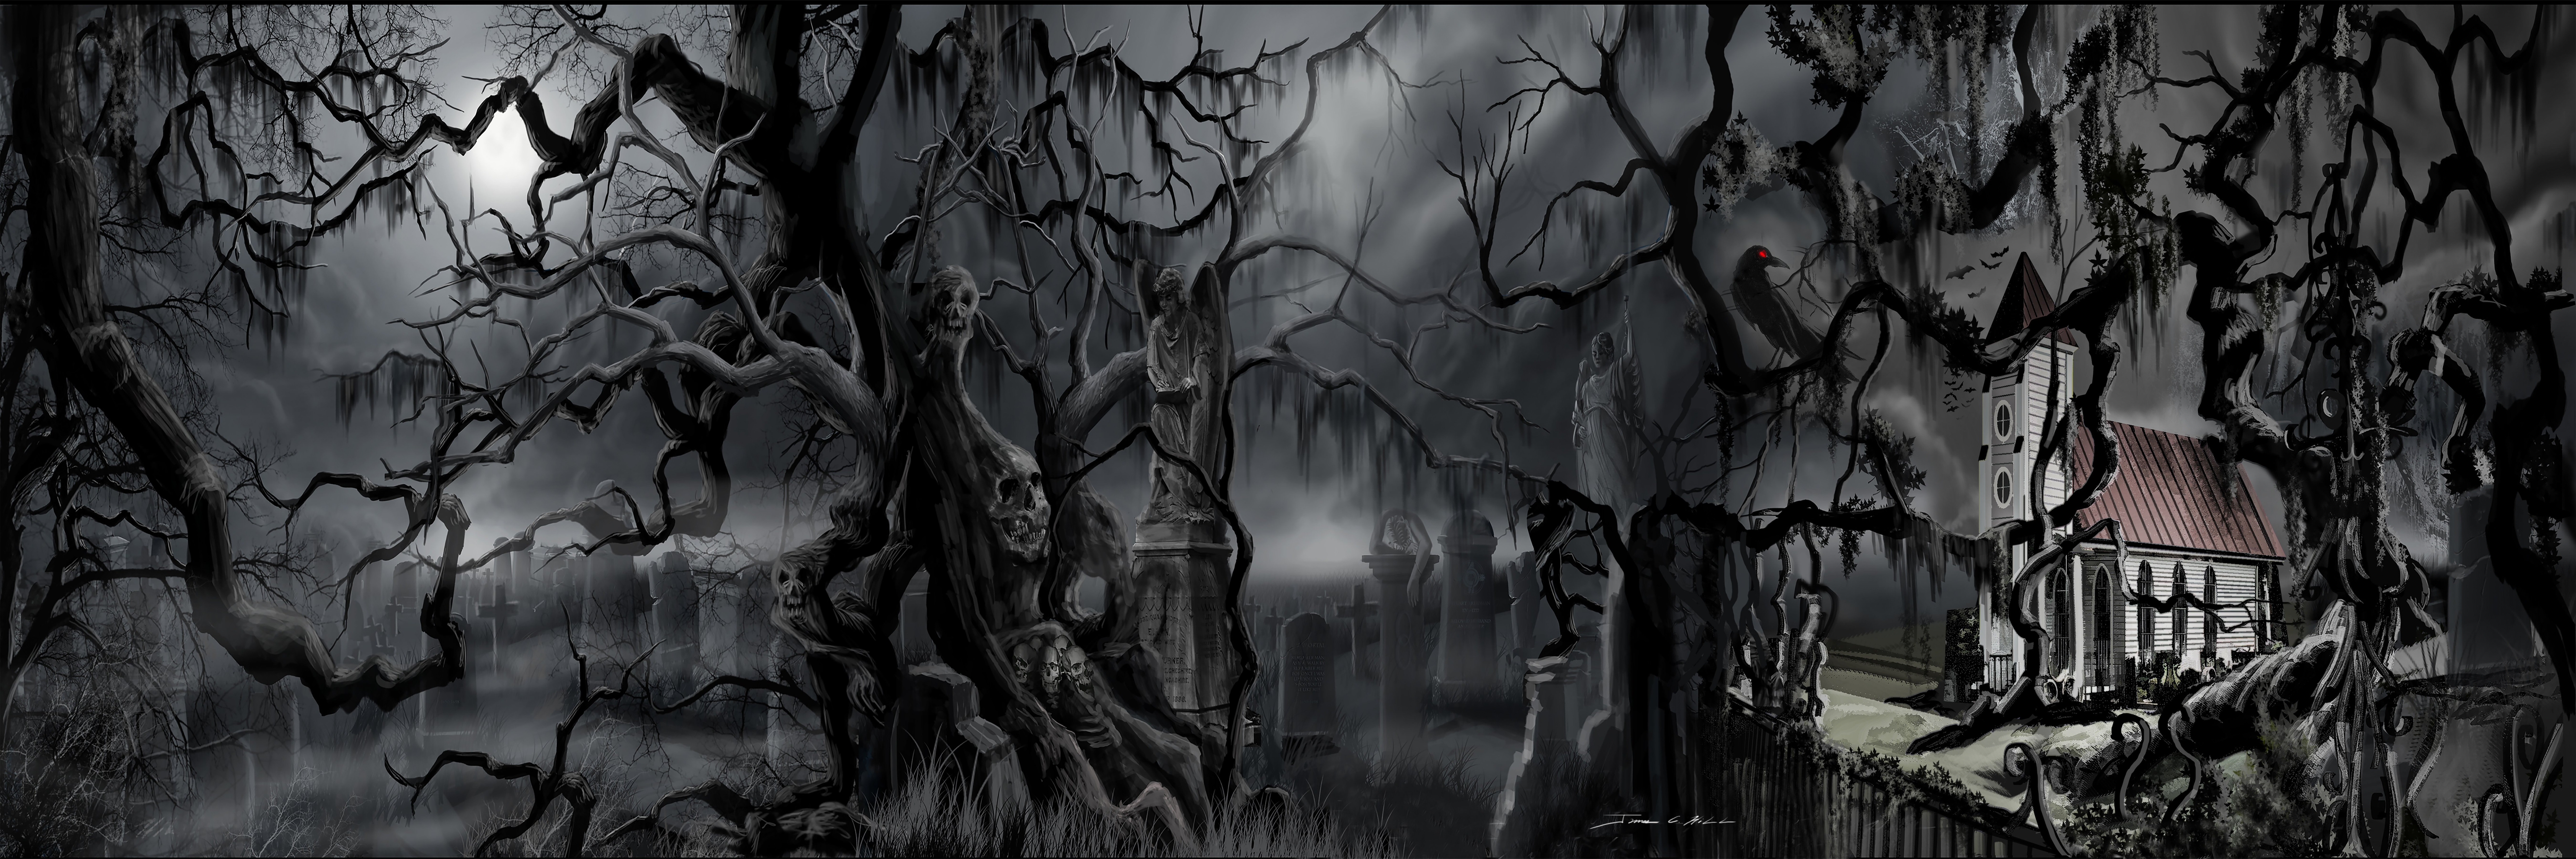 James Hill: 'darkness in the midnight hour', 2020 Digital Painting, Other. Painting of a mysterious cemetery - Classical Horror Style - Vintage Hollywood - Creepy, Eerie, Haunted, Supernatural...